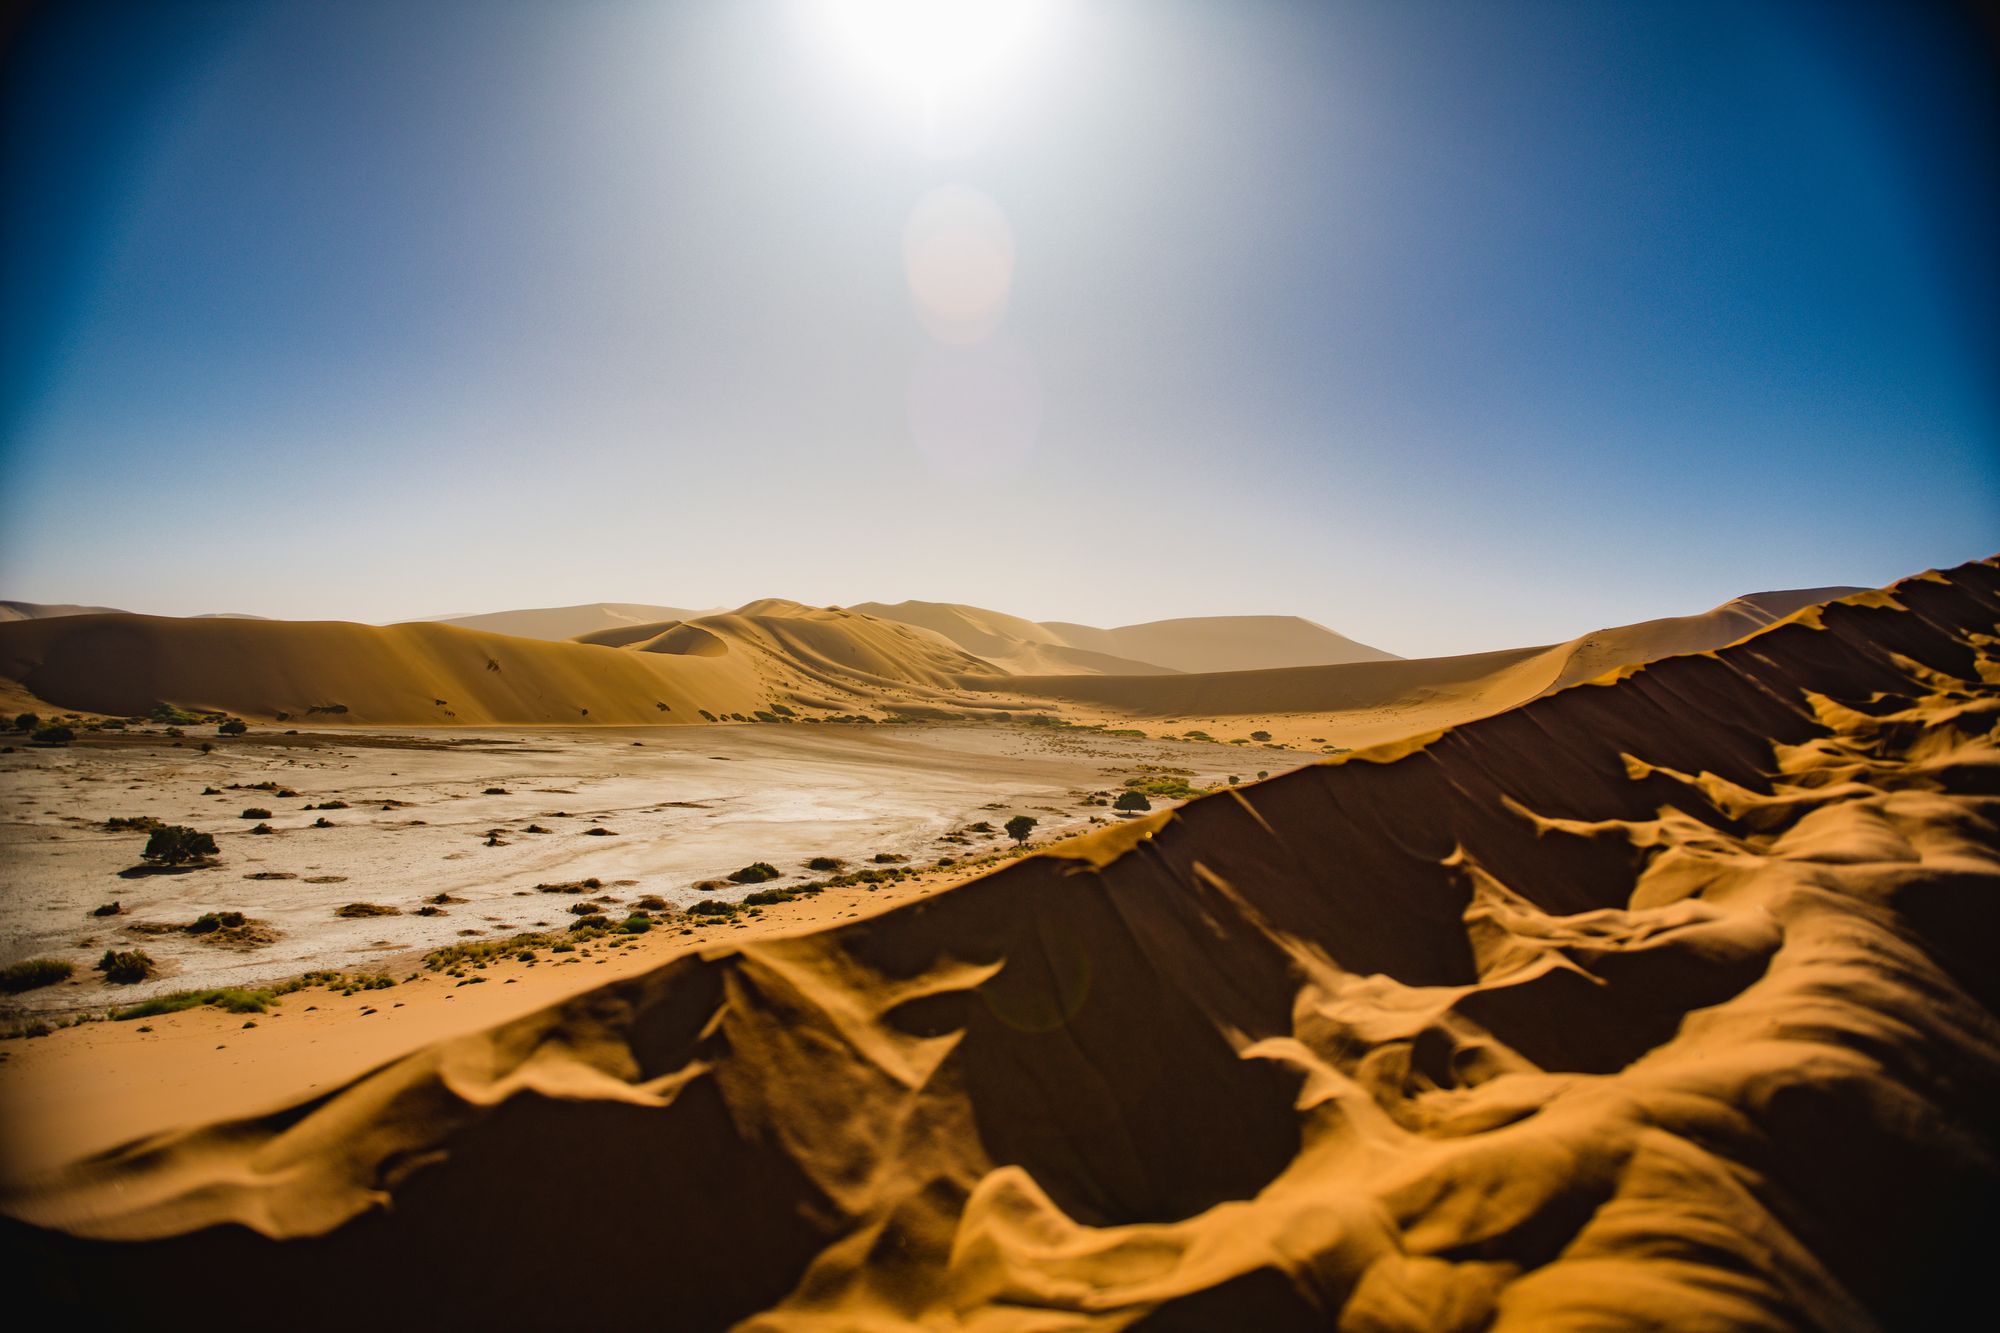 Namibia, more than just sand